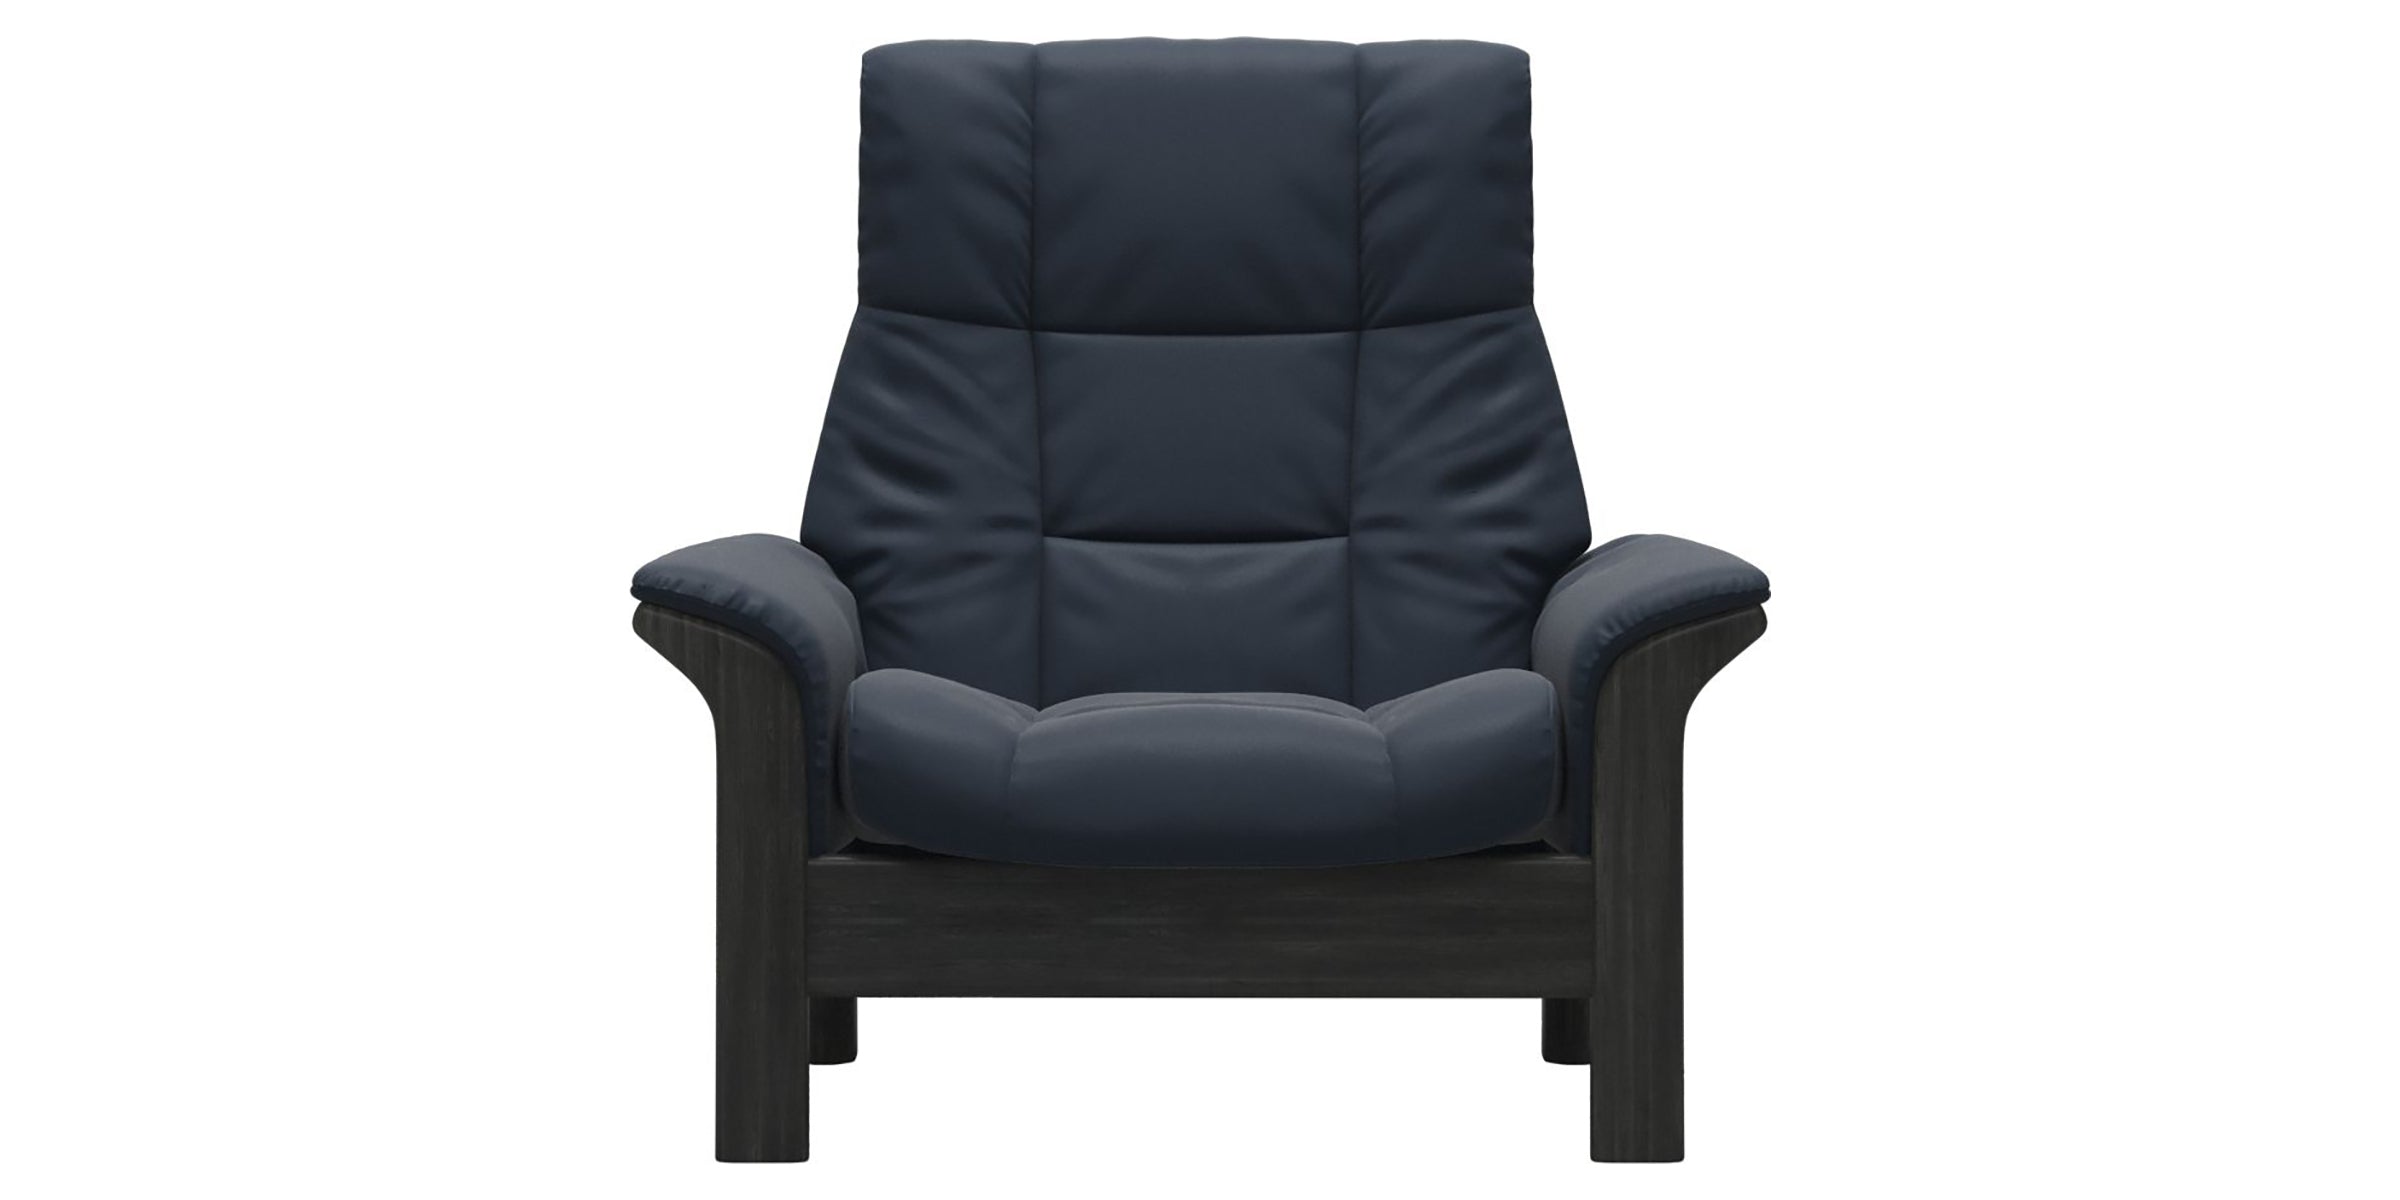 Paloma Leather Oxford Blue and Grey Base | Stressless Buckingham High Back Chair | Valley Ridge Furniture